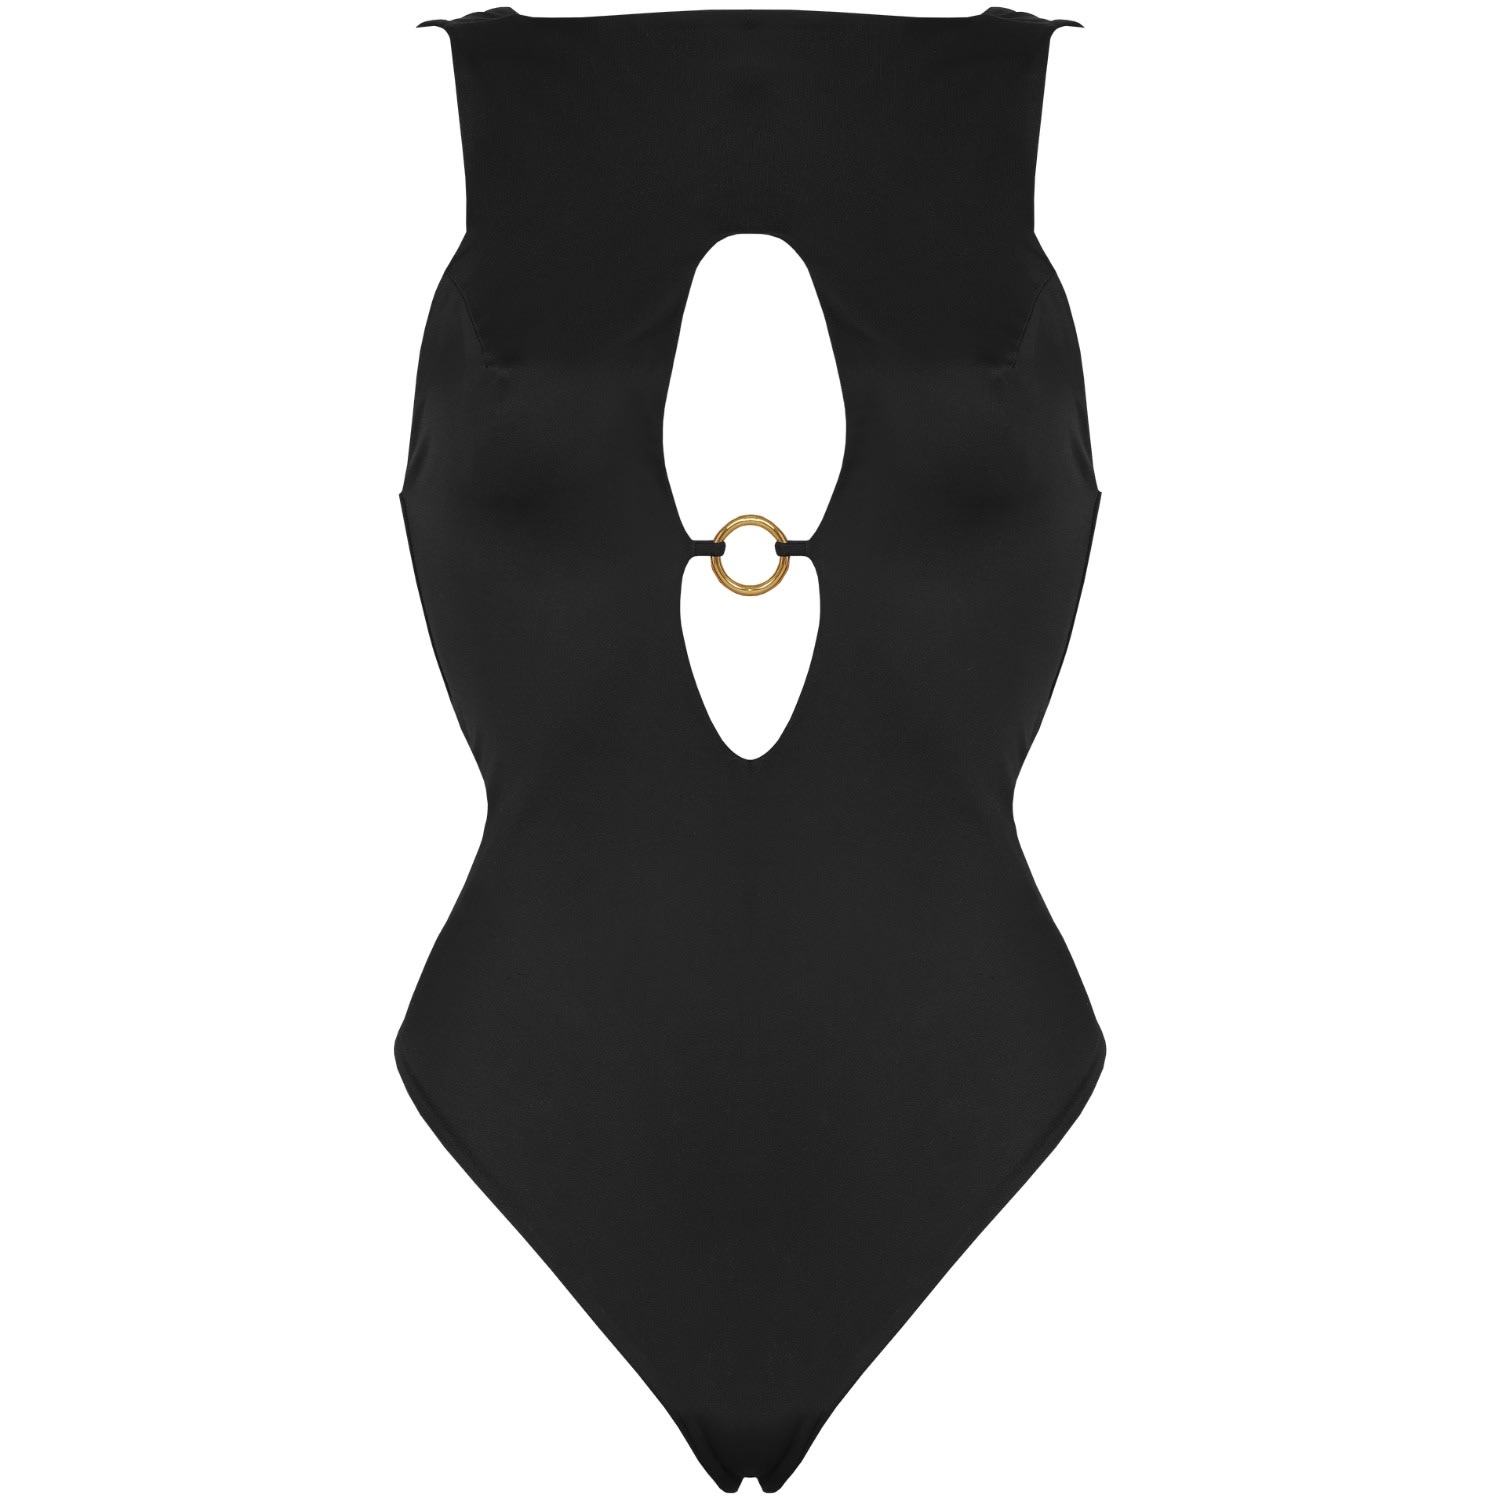 Antoninias Women's Venetia One-piece Swimsuit With Cut-out Detailing In Black.